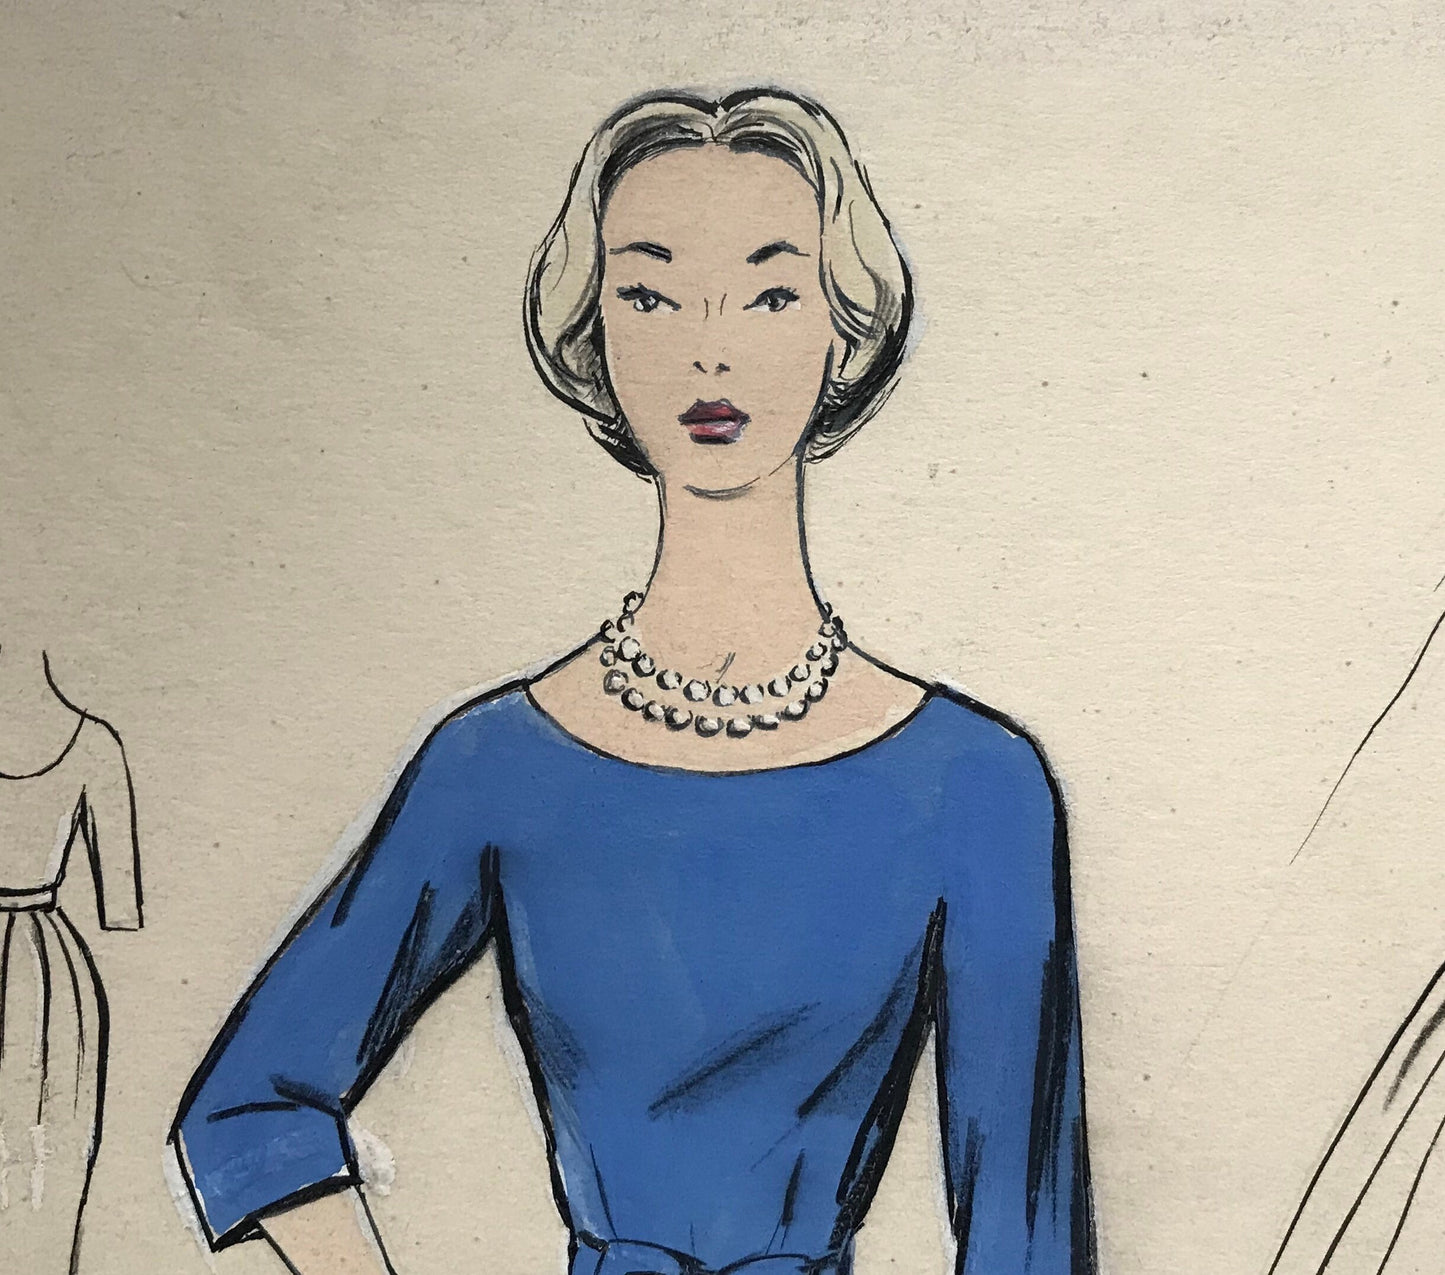 A Large Hand Drawn and Hand Painted Fashion Illustration. Spanish. Barcelona. 1957 - 58. Size: 52 x 41 cms.